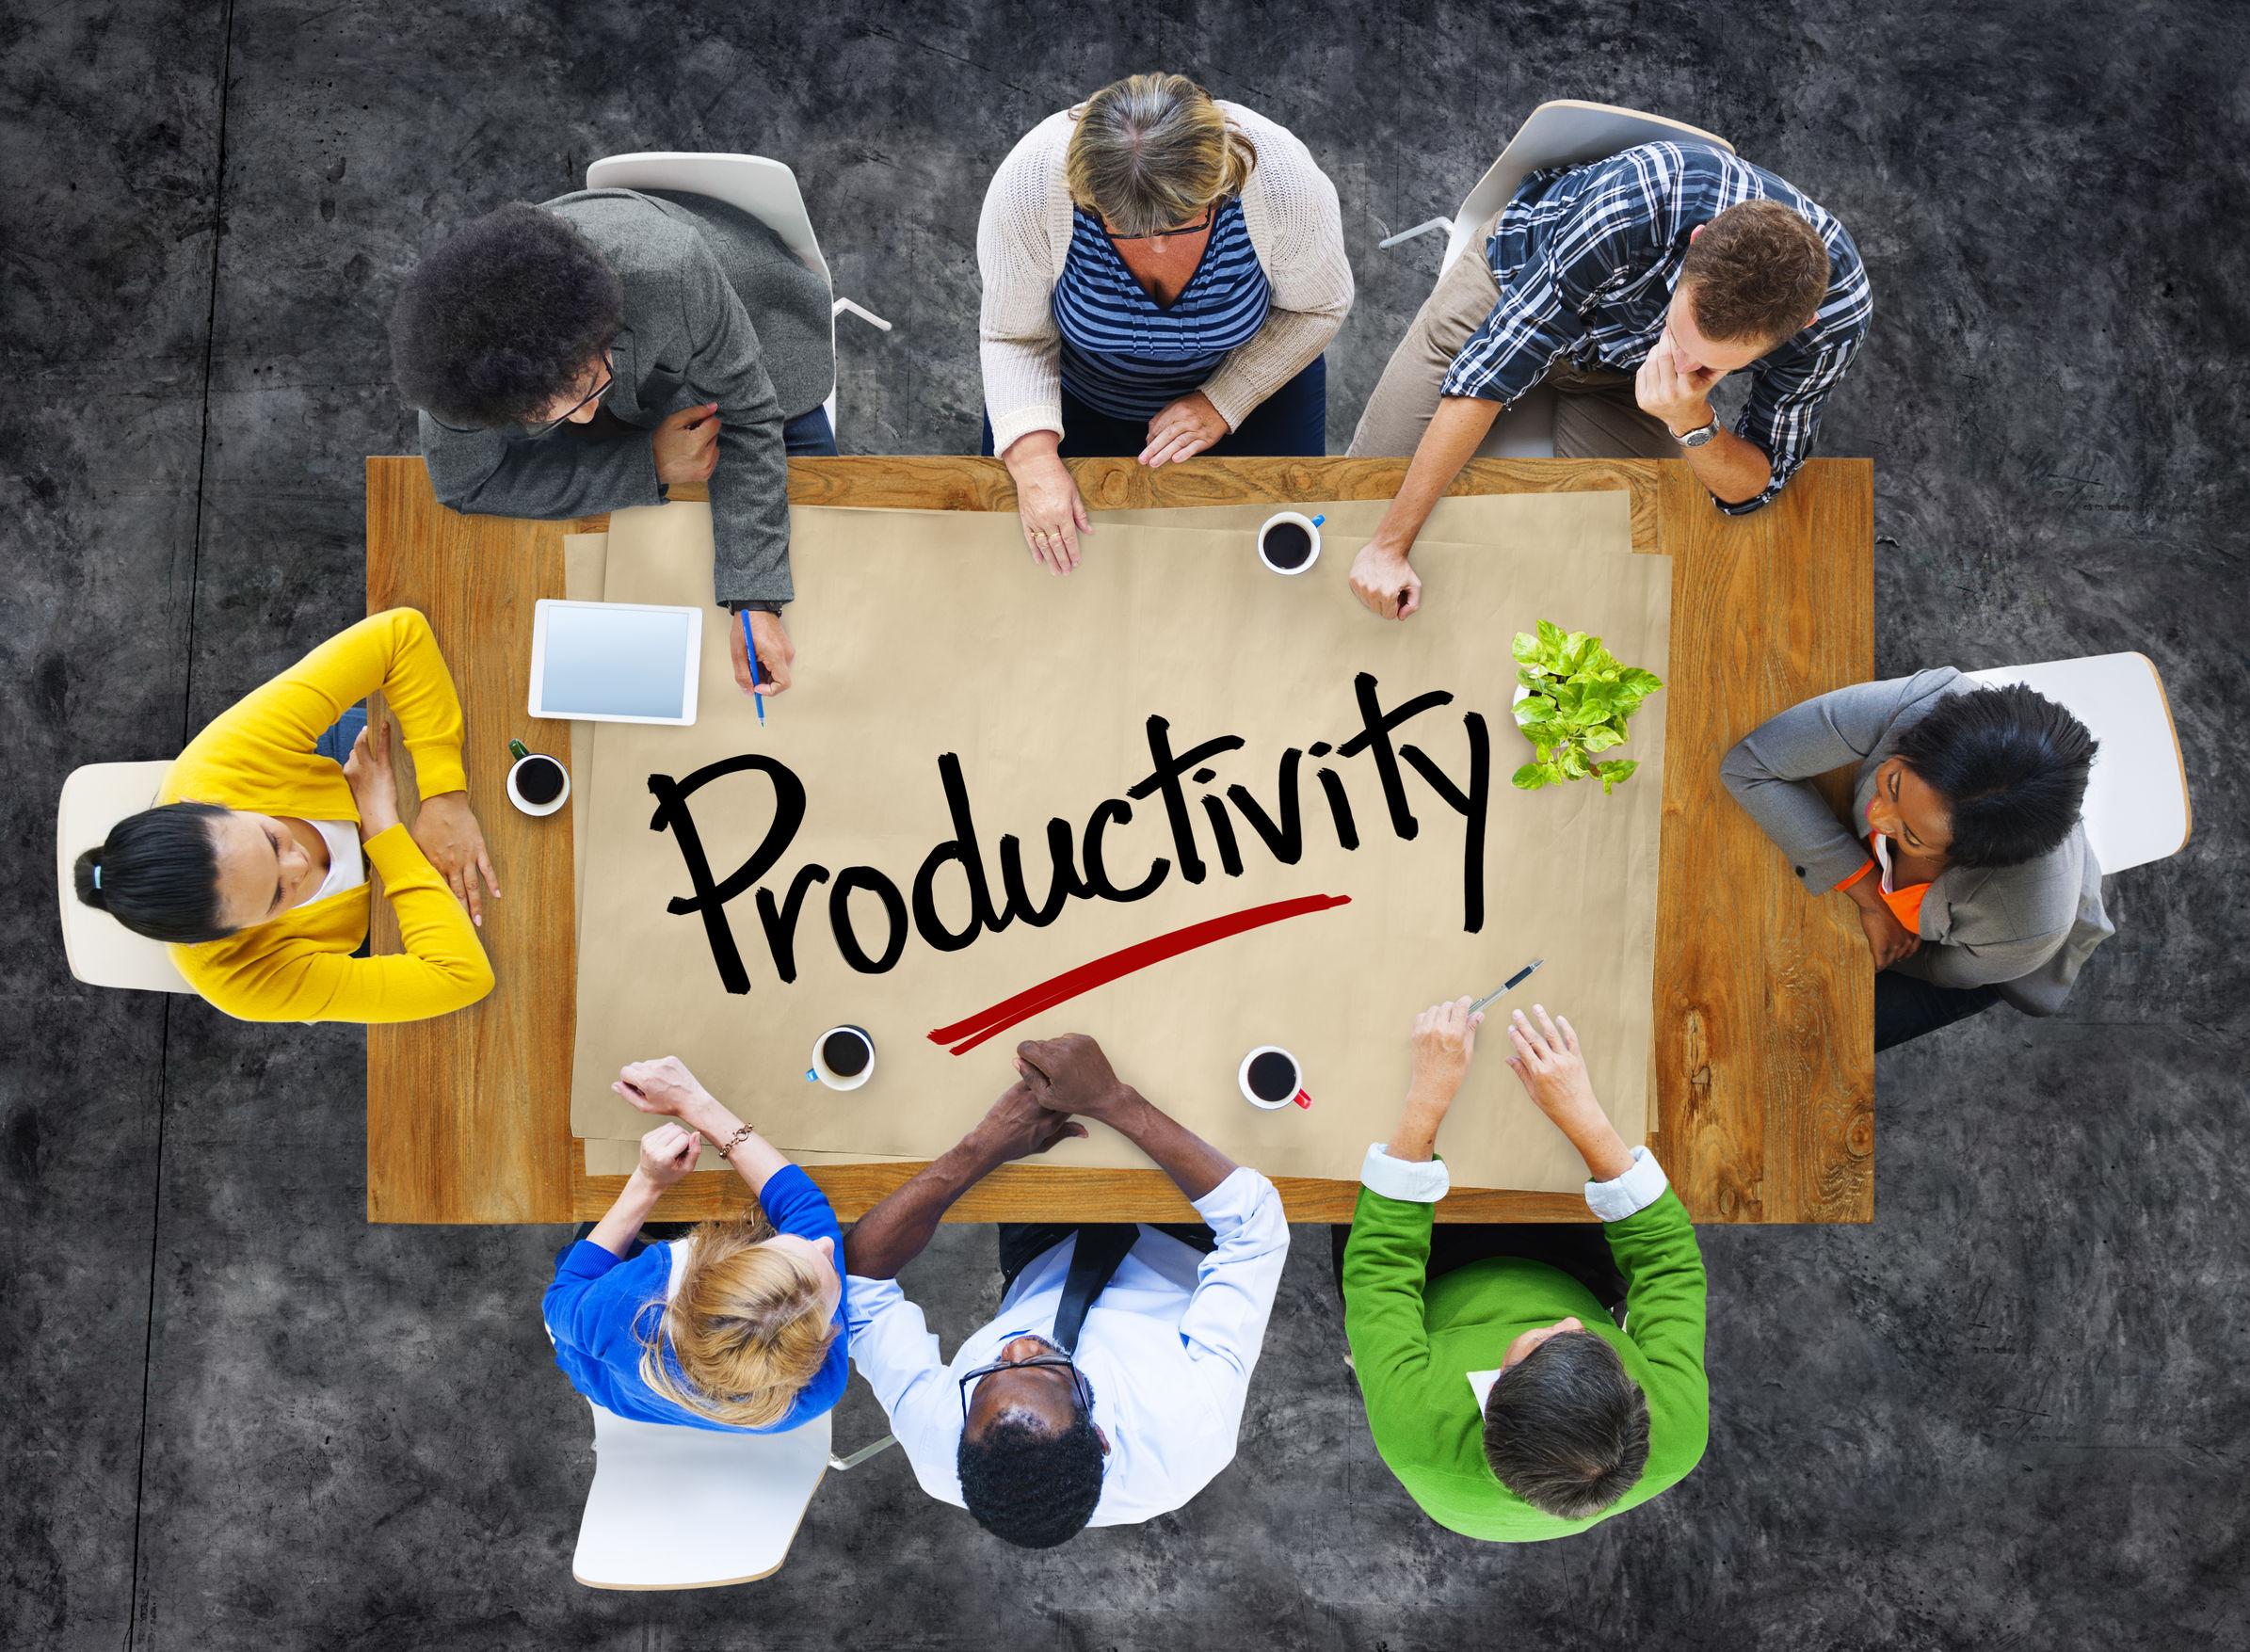 Declining Productivity Shows that Employees Are Better Off than Expected